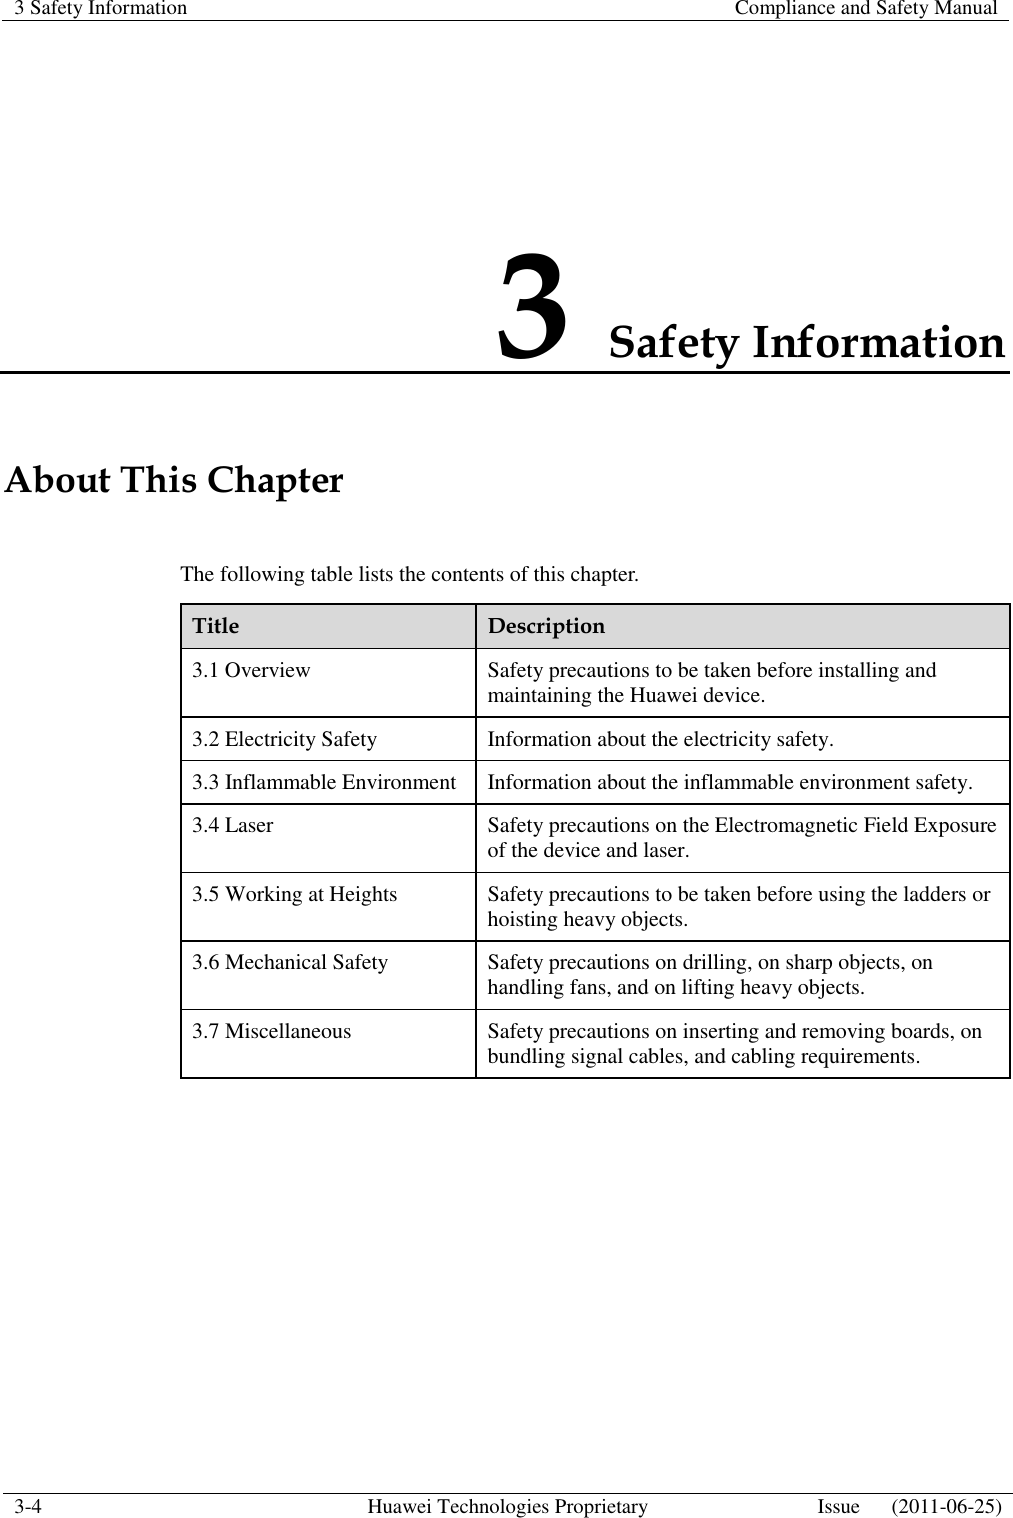 3 Safety Information    Compliance and Safety Manual  3-4 Huawei Technologies Proprietary Issue      (2011-06-25)  3 Safety Information About This Chapter The following table lists the contents of this chapter. Title Description 3.1 Overview Safety precautions to be taken before installing and maintaining the Huawei device. 3.2 Electricity Safety Information about the electricity safety. 3.3 Inflammable Environment Information about the inflammable environment safety. 3.4 Laser Safety precautions on the Electromagnetic Field Exposure of the device and laser. 3.5 Working at Heights Safety precautions to be taken before using the ladders or hoisting heavy objects. 3.6 Mechanical Safety Safety precautions on drilling, on sharp objects, on handling fans, and on lifting heavy objects. 3.7 Miscellaneous Safety precautions on inserting and removing boards, on bundling signal cables, and cabling requirements.  